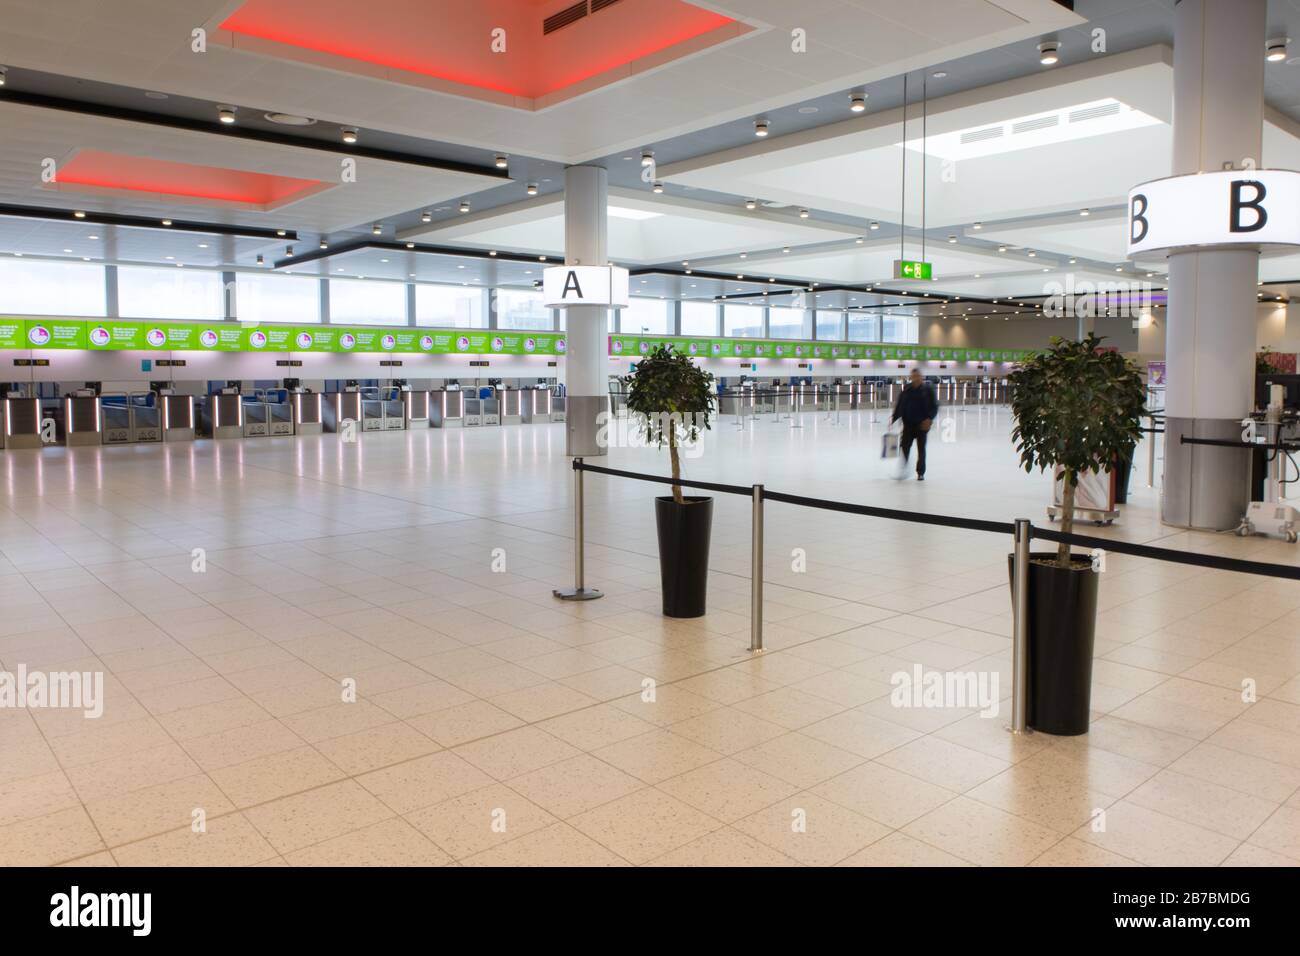 London, UK, 14th March, 2020.  Airline check-in desks at London Gatwick Airport are silent and empty as news breaks of the decision by US President Donald Trump to ban all travel to the USA from the UK and Ireland. Credit: Brian Wilson/Alamy Live News. Stock Photo